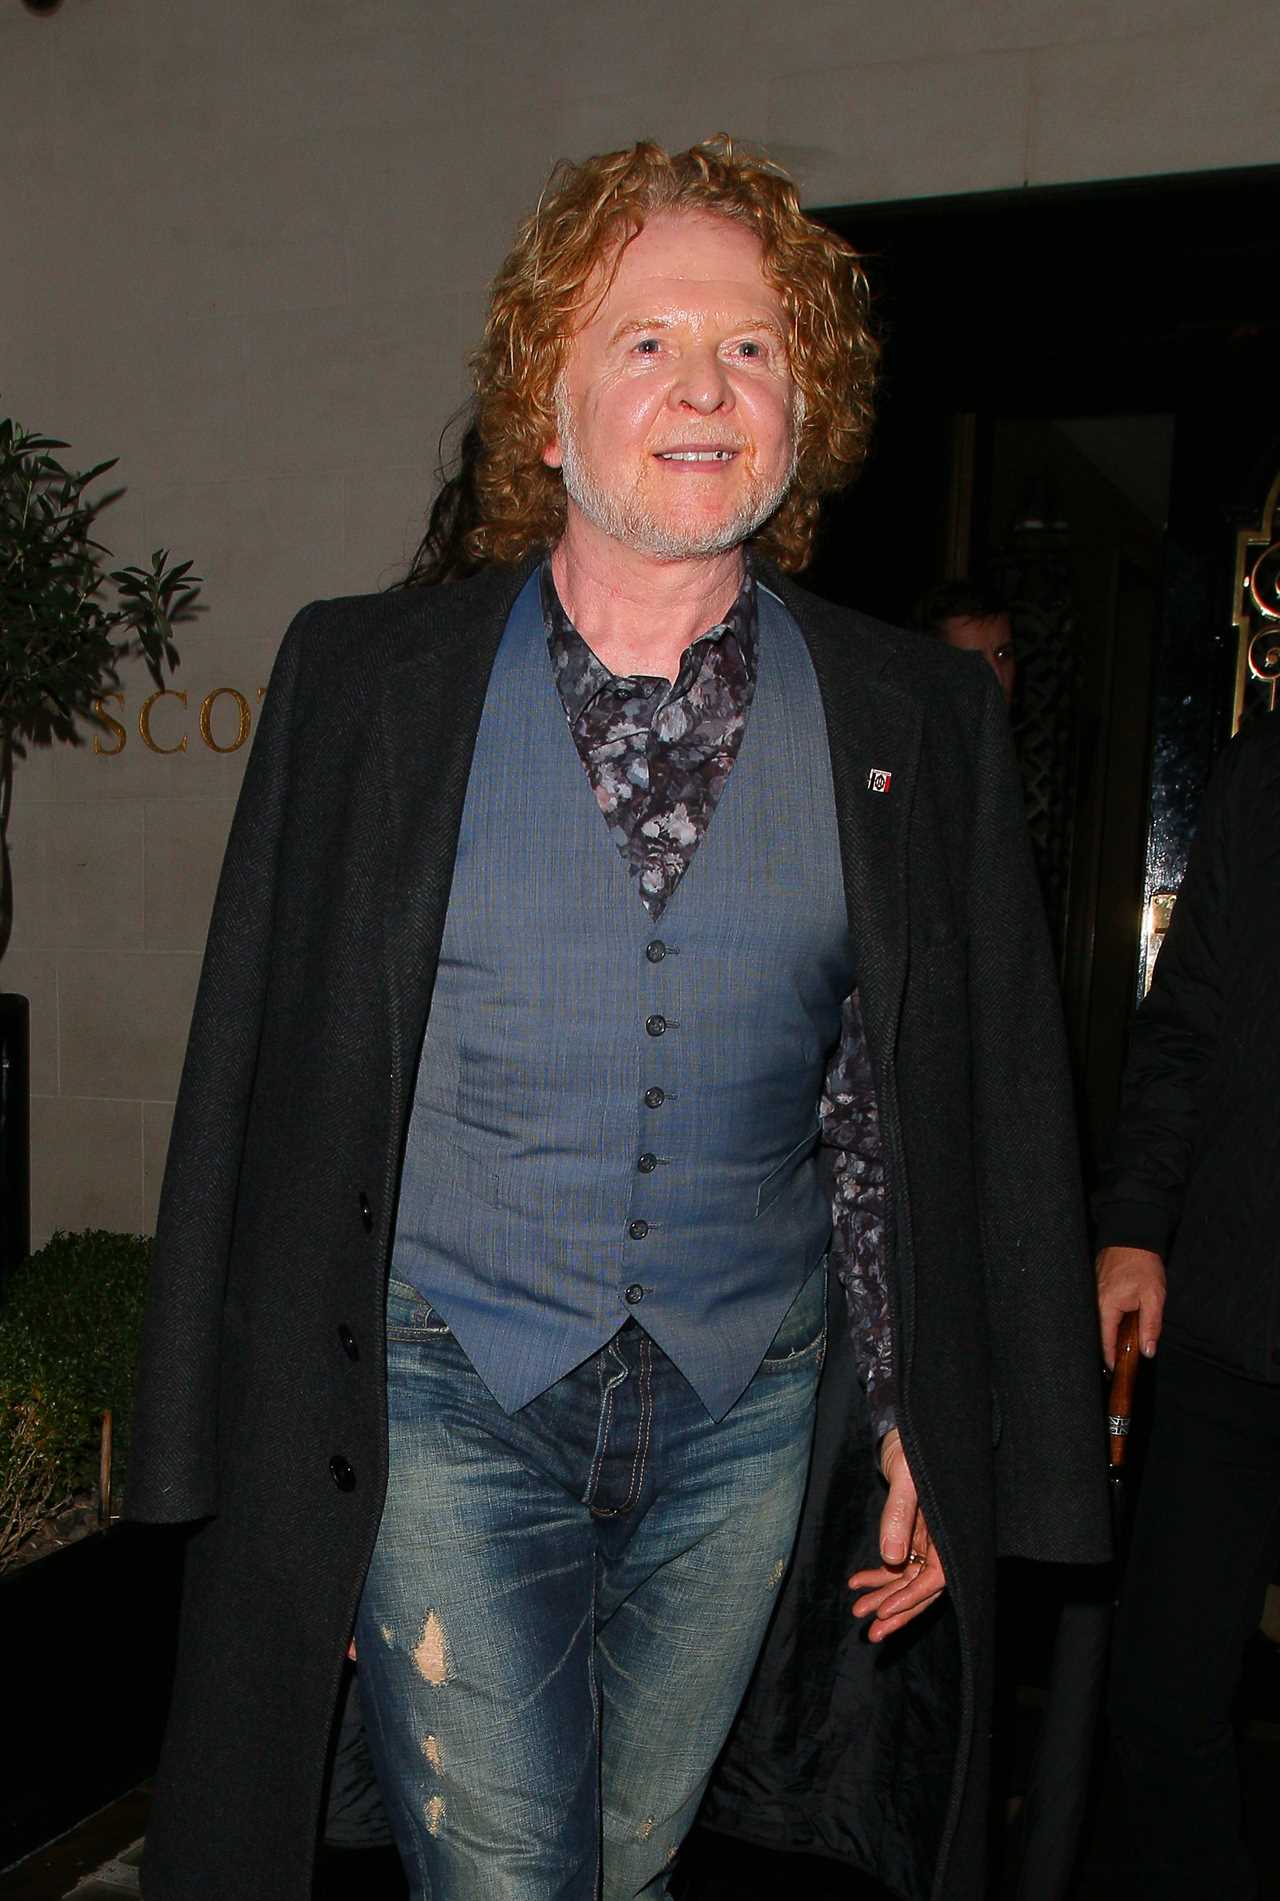 I’ve got Long Covid, can’t sleep and have heart palpitations at night, says Simply Red legend Mick Hucknall